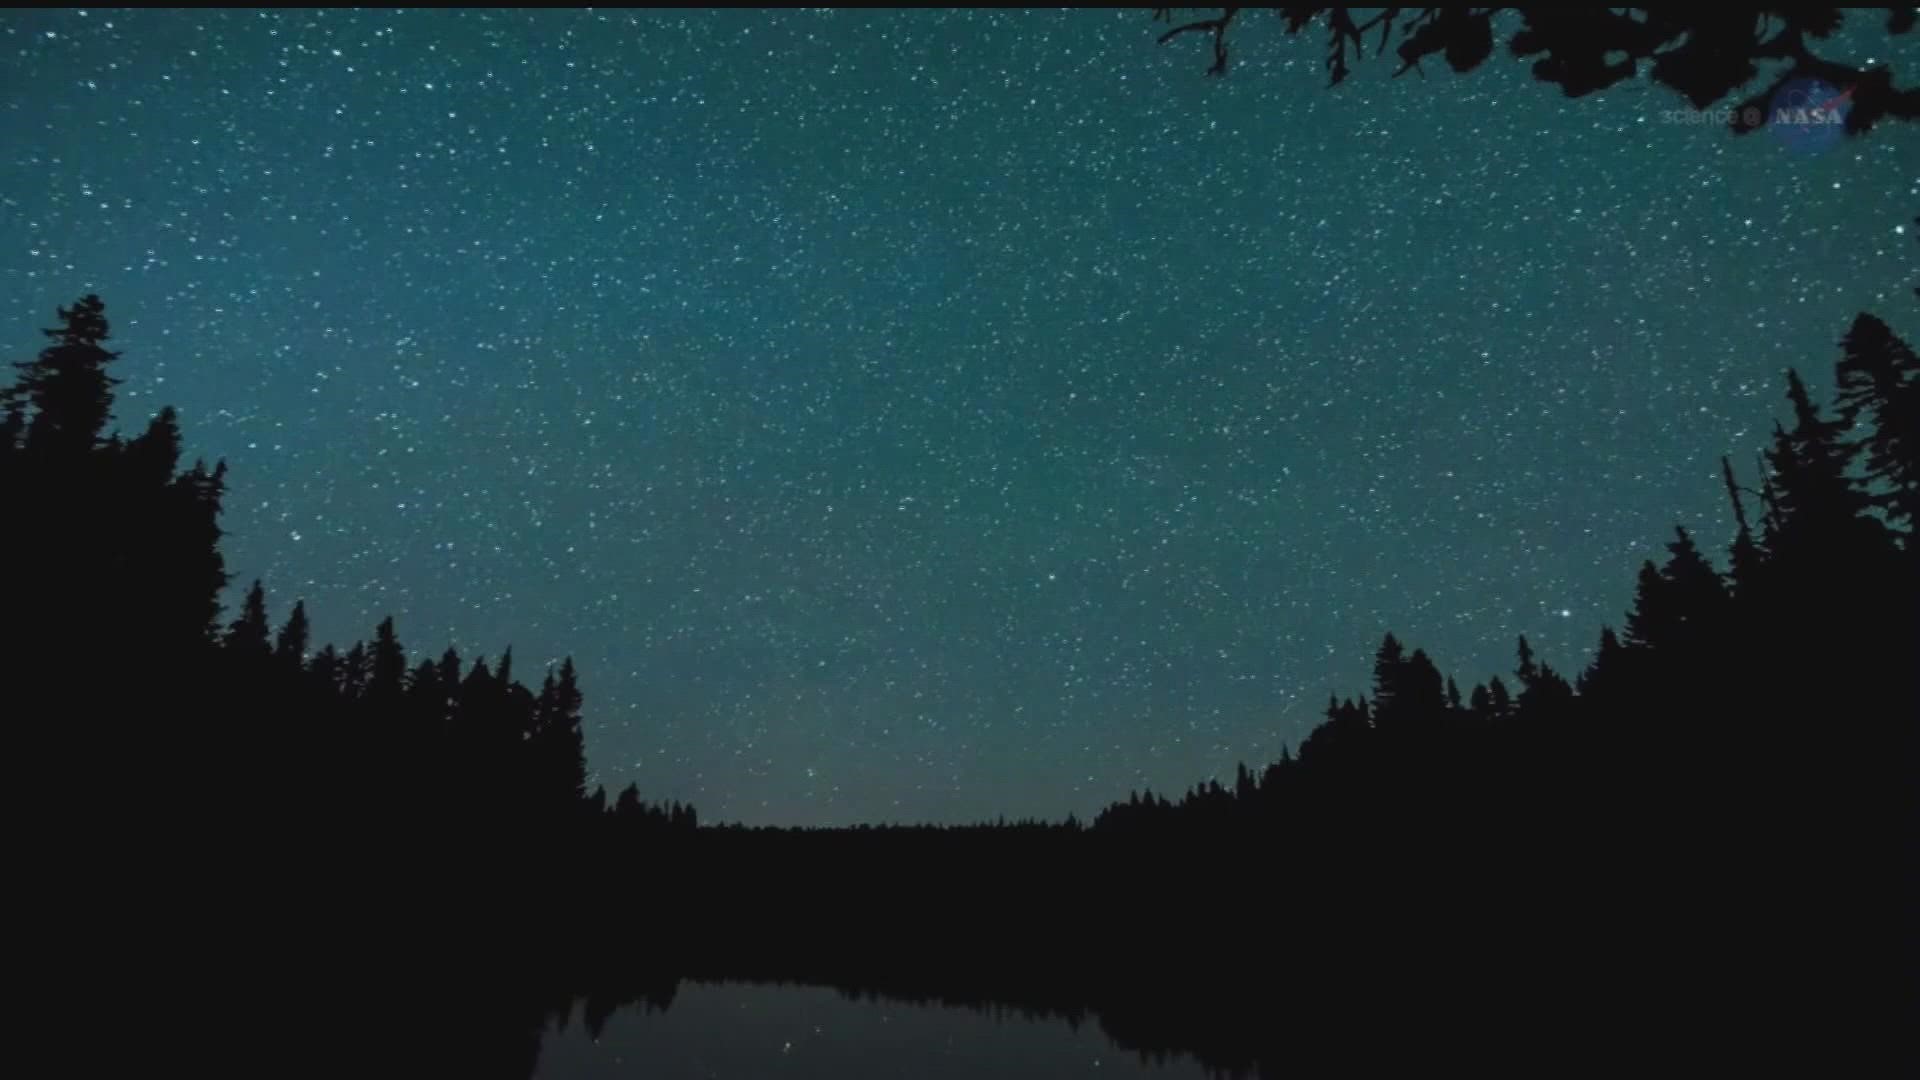 KARE 11 Meteorologist Ben Dery explains all of the cool things in space that people in Minnesota will be able to see in the sky during the month of May.